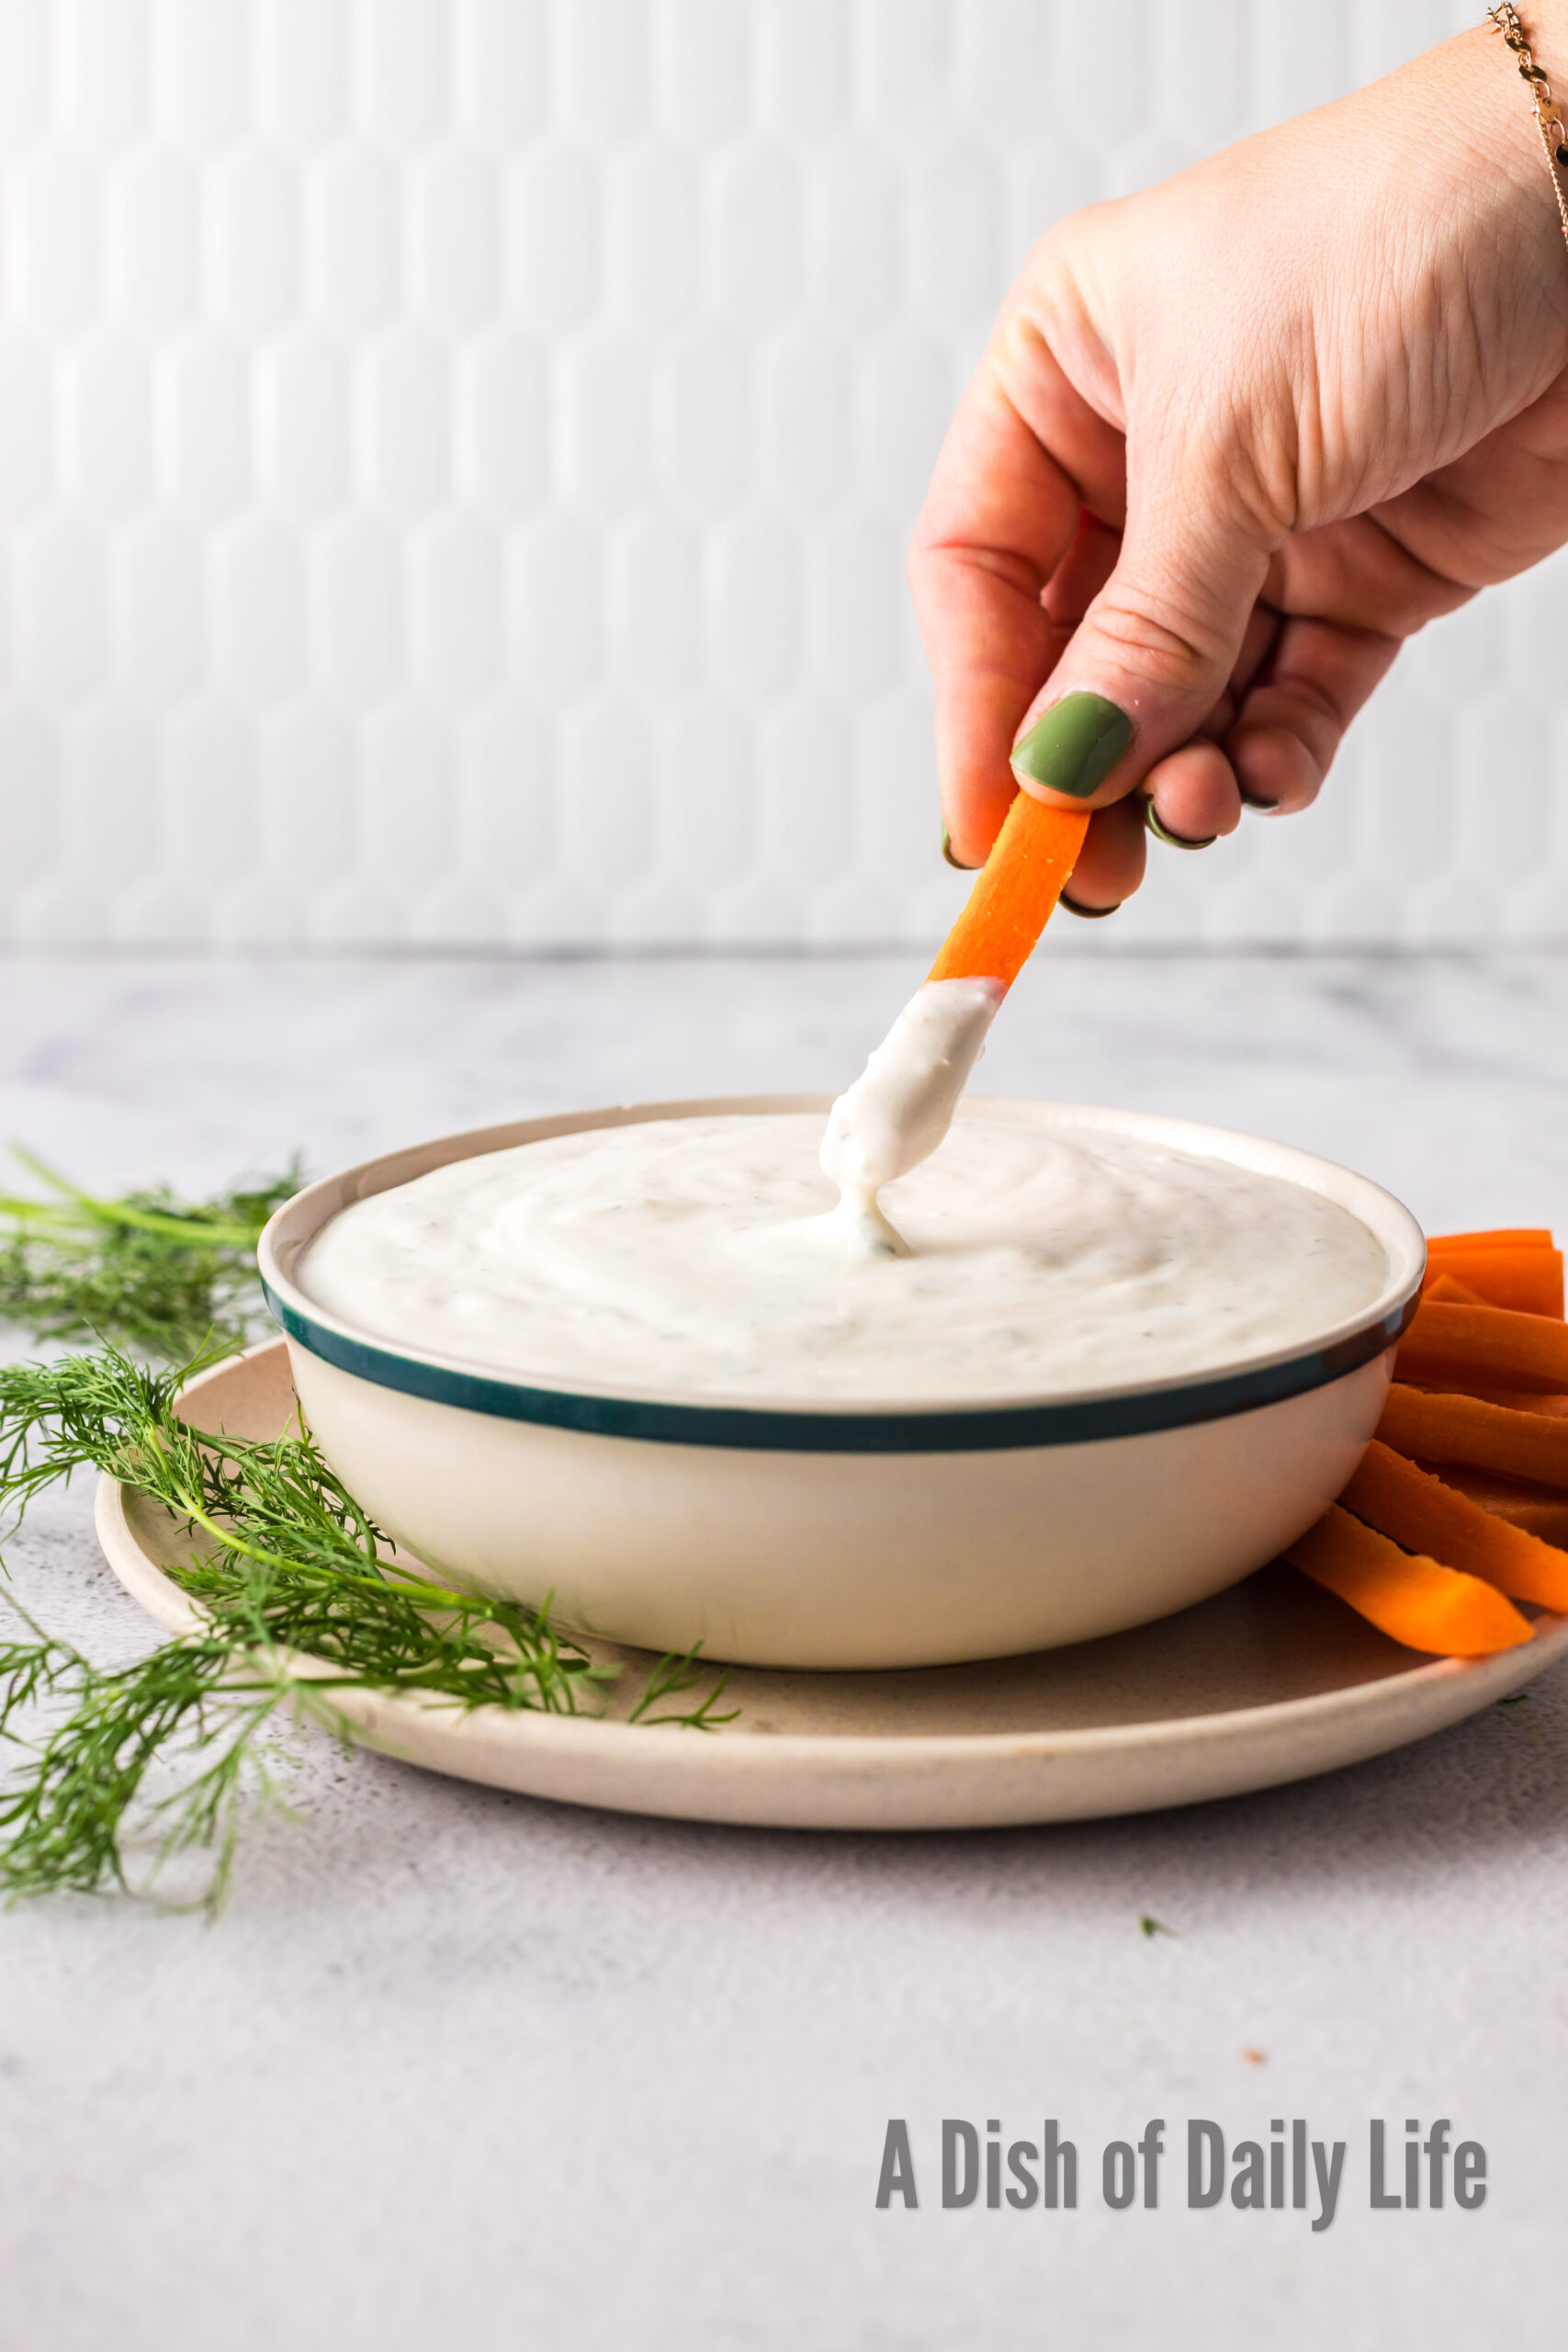 carrot being dipped into dip